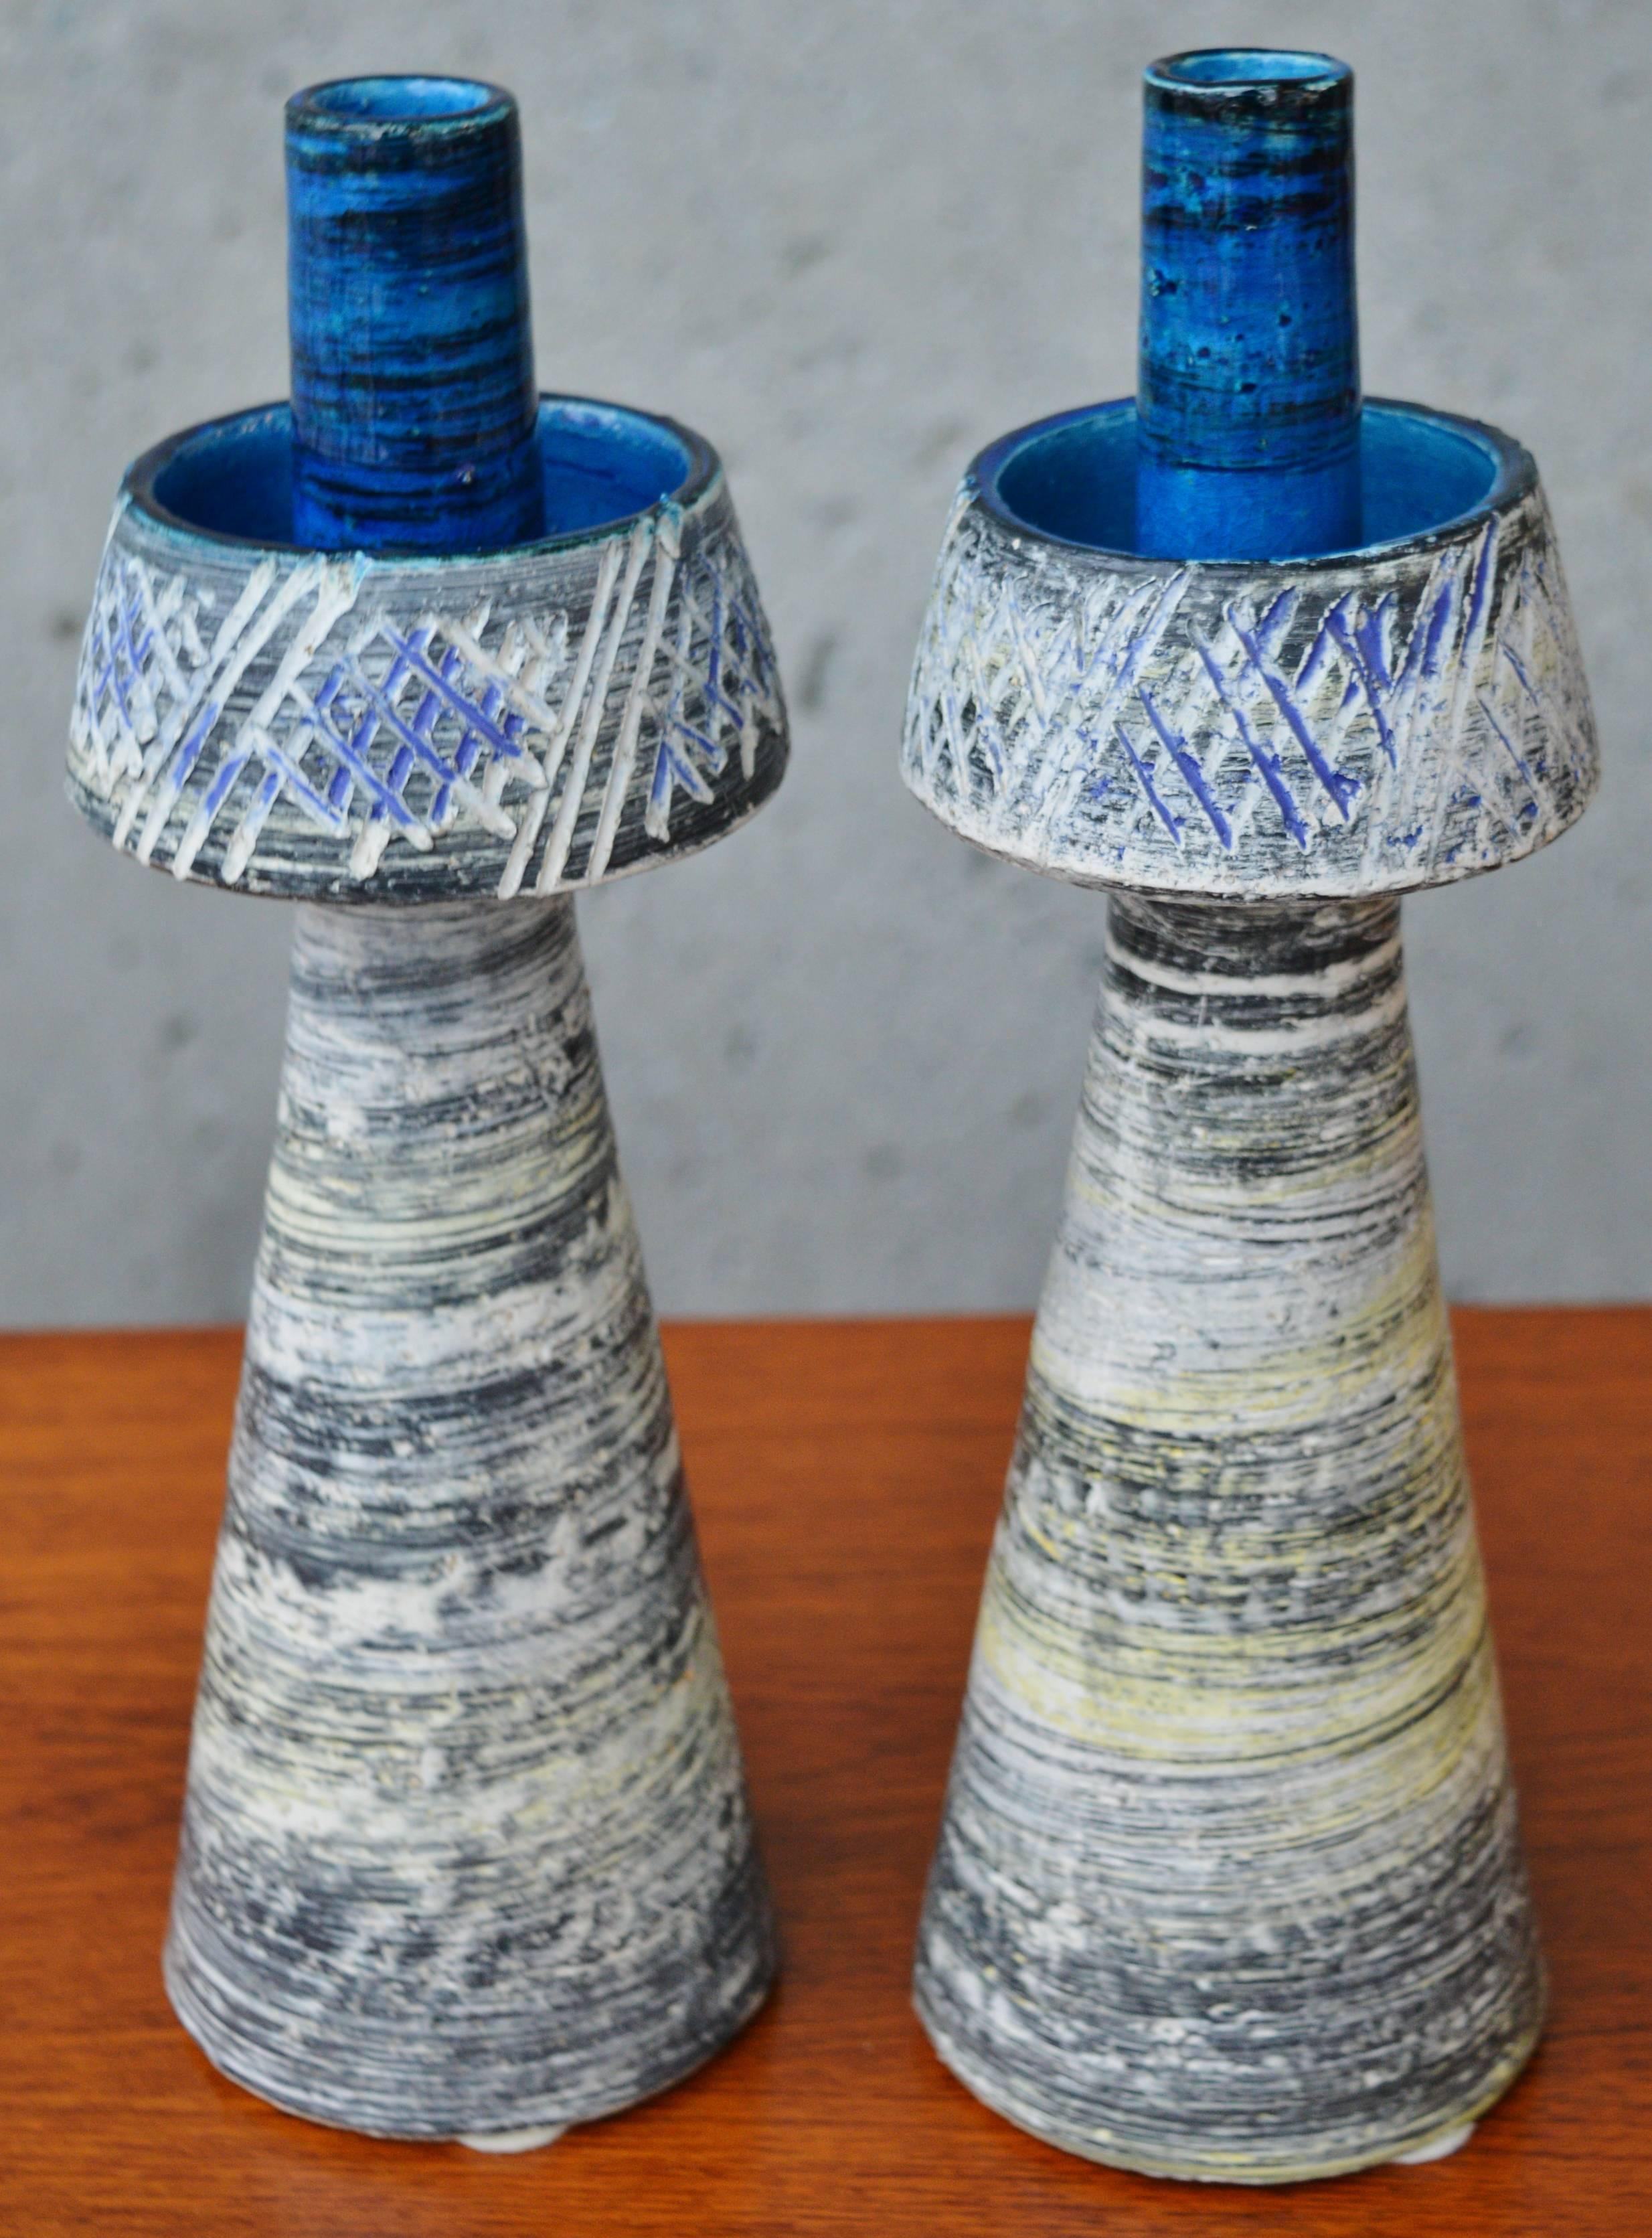 This lovely pair of Mid-Century Modern Italian ceramic candle sticks are a rare Aldo Londi for Bitossi find. Featuring conical bases that taper towards the top and are glazed in diagonal striations of gray and yelllow on white, which then flares